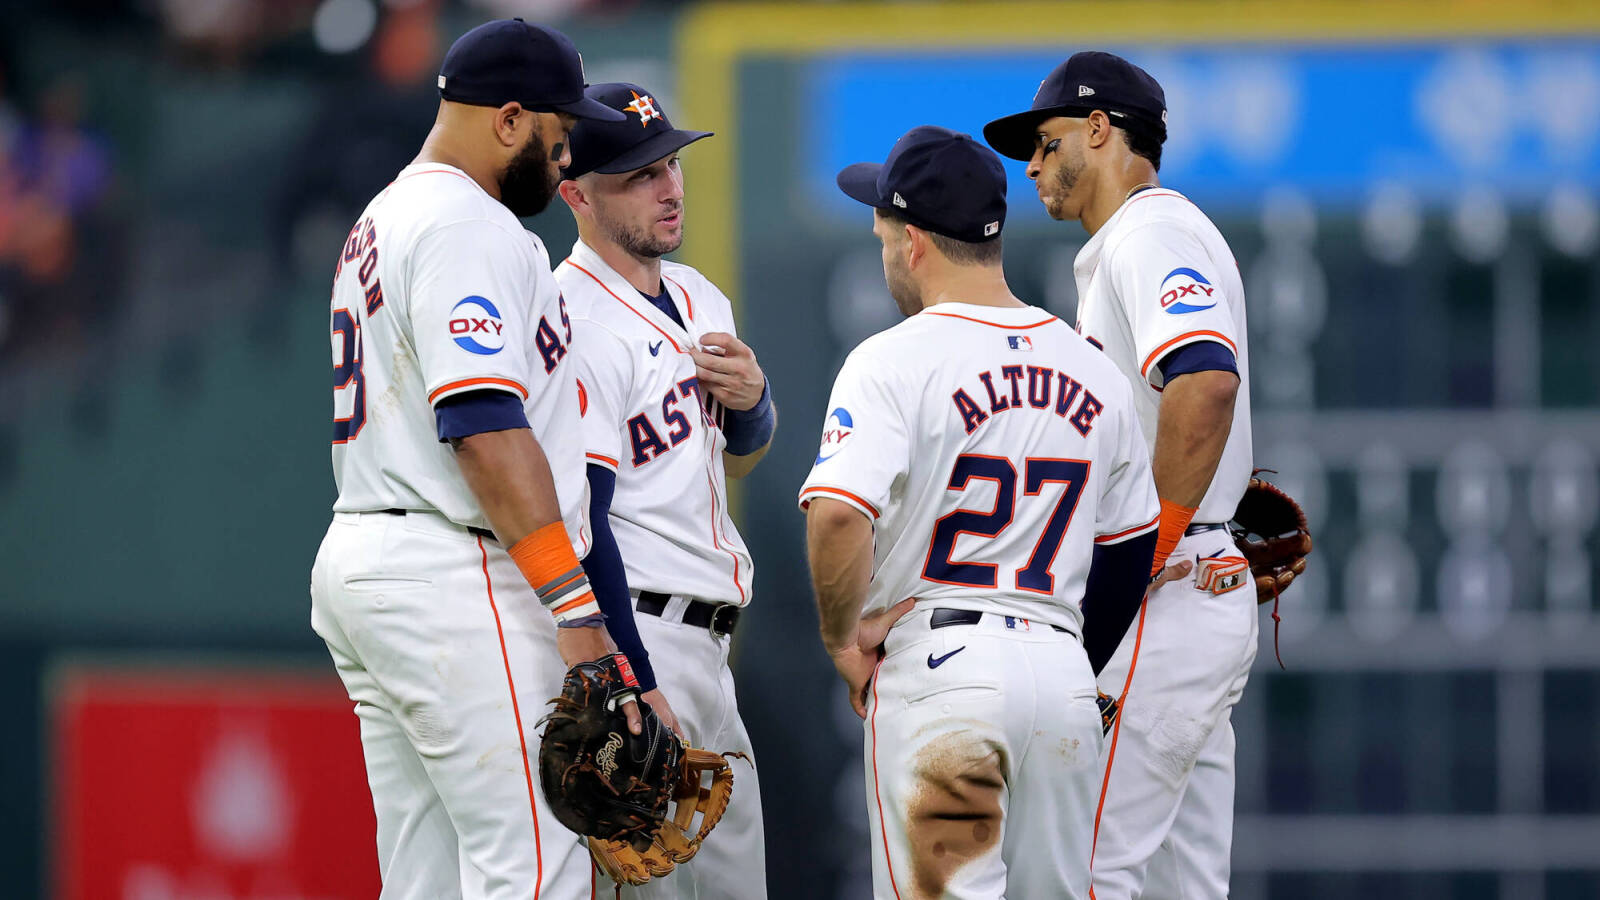 Watch: Astros woes continue in one-run loss to Mariners